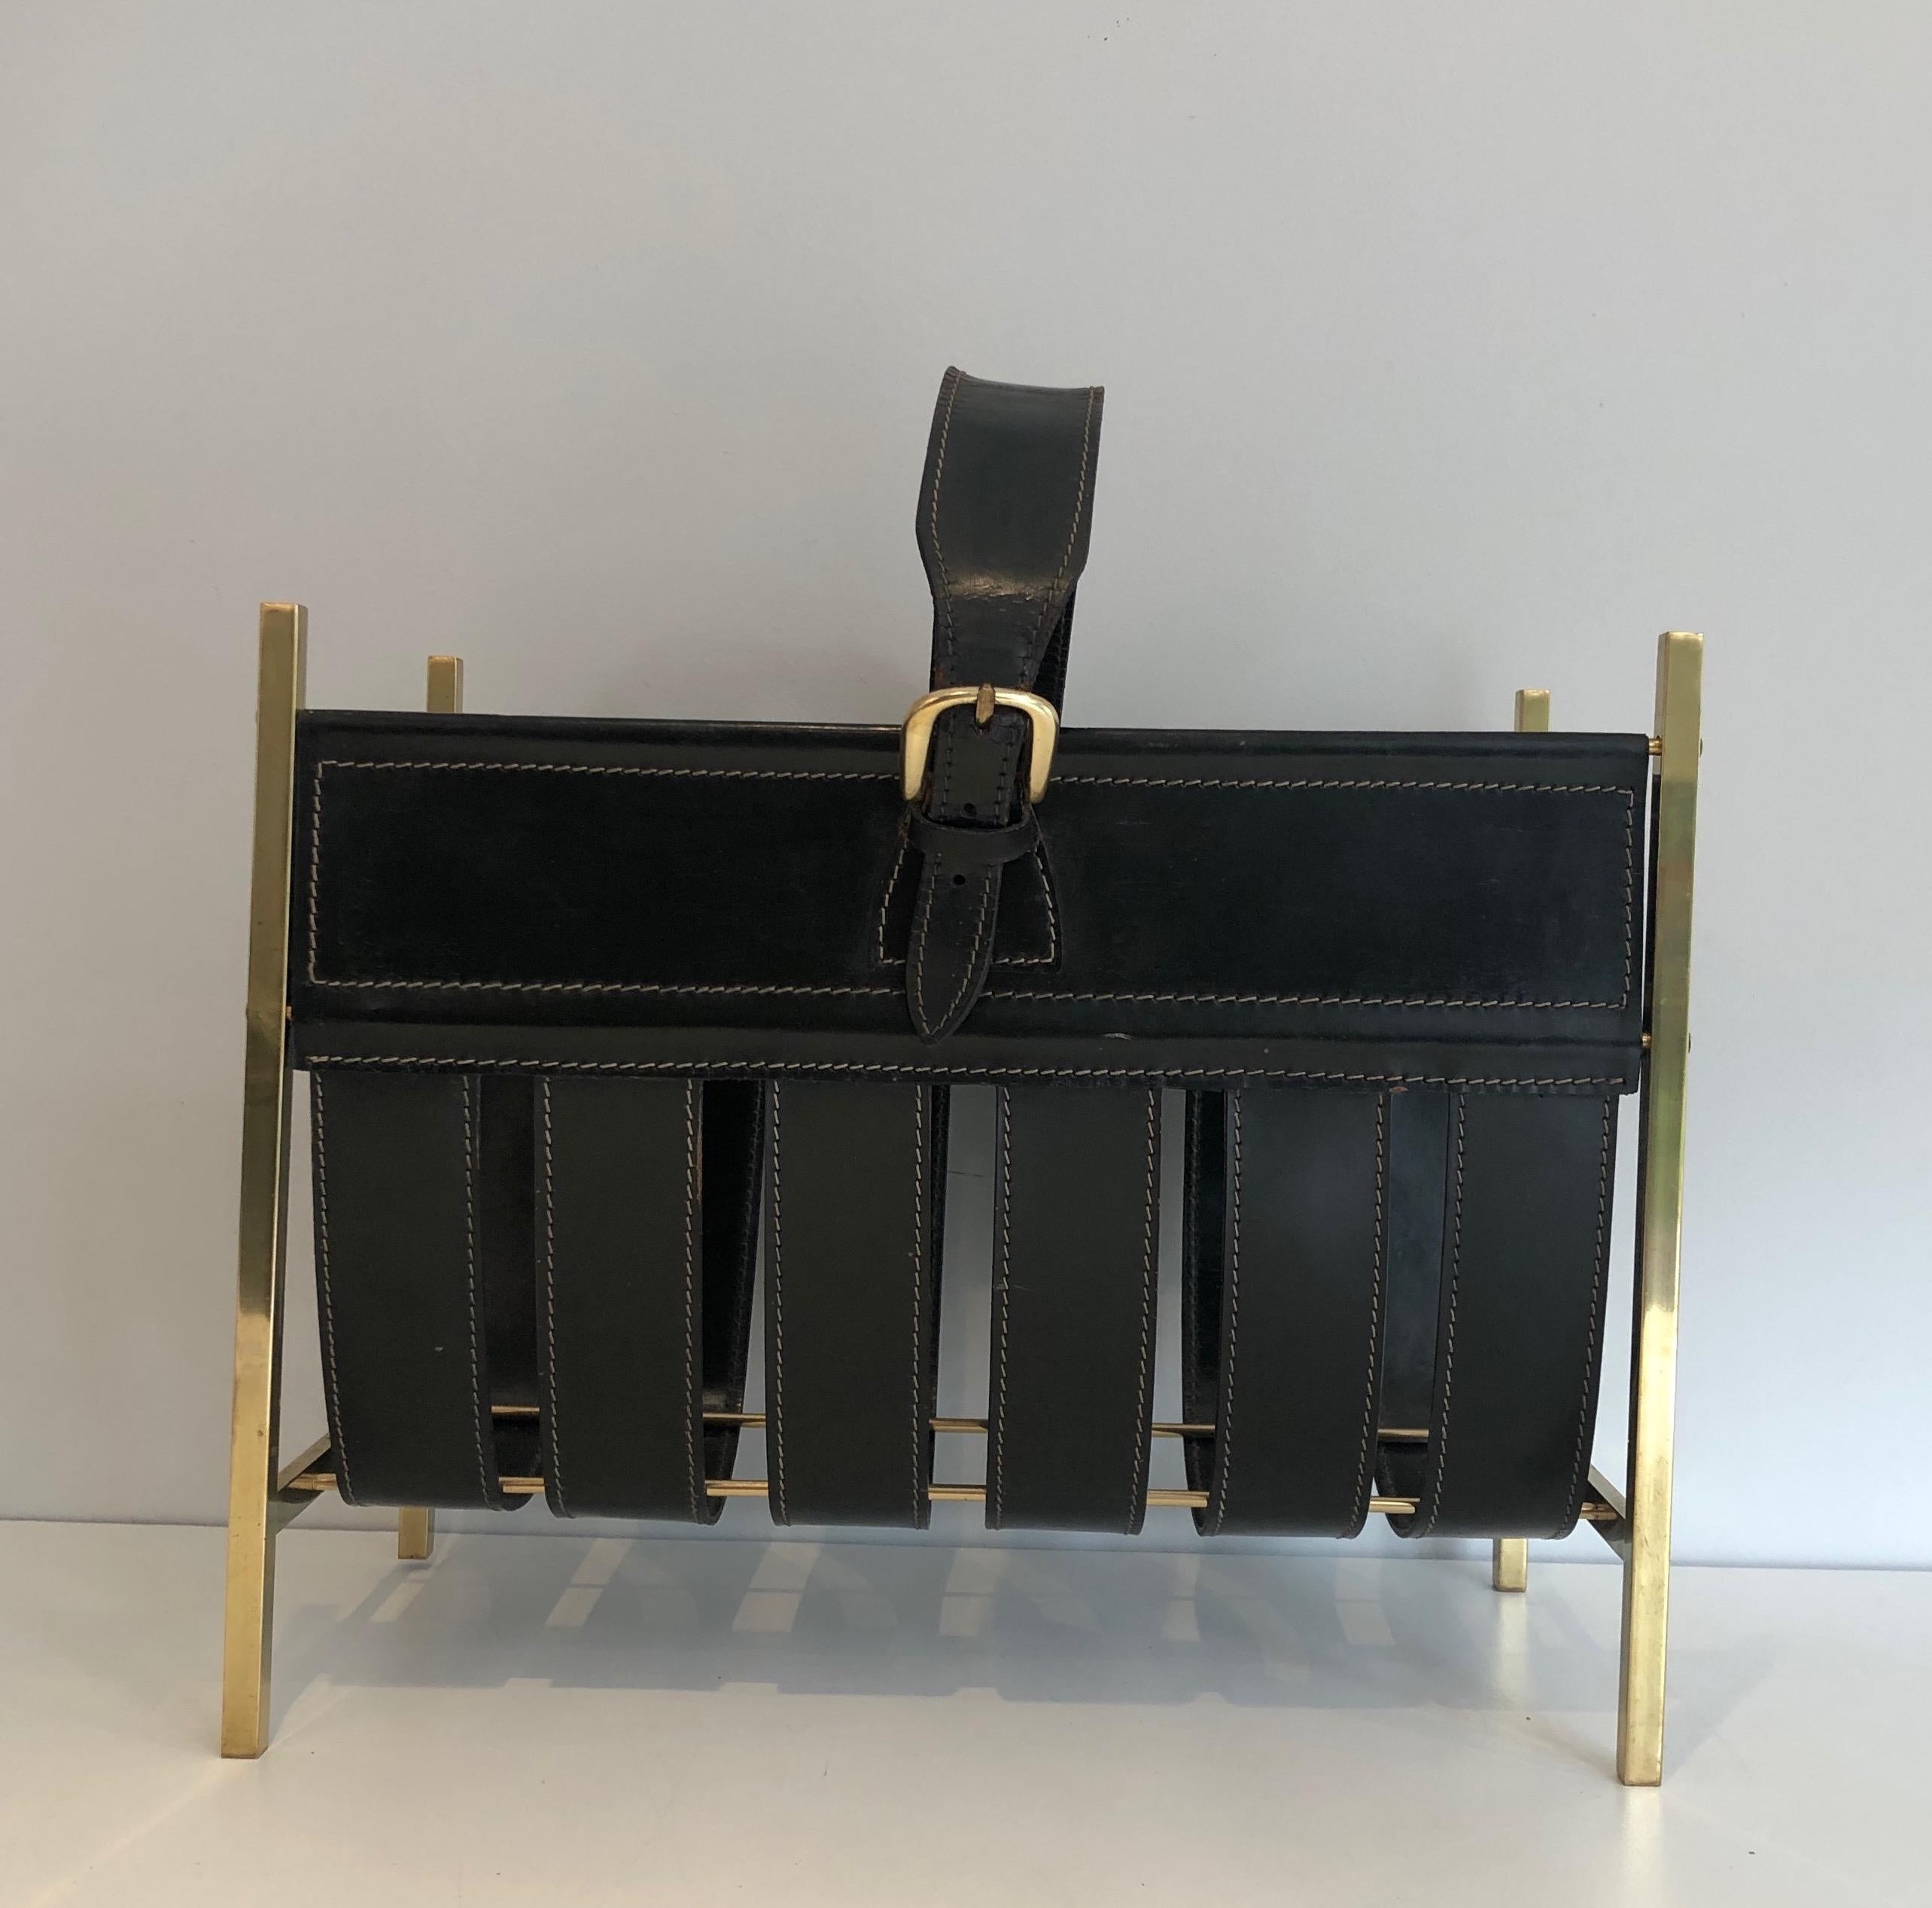 Hand-Bag Brass and Leather Magazine Rack by Jacques Adnet, circa 1940 For Sale 4